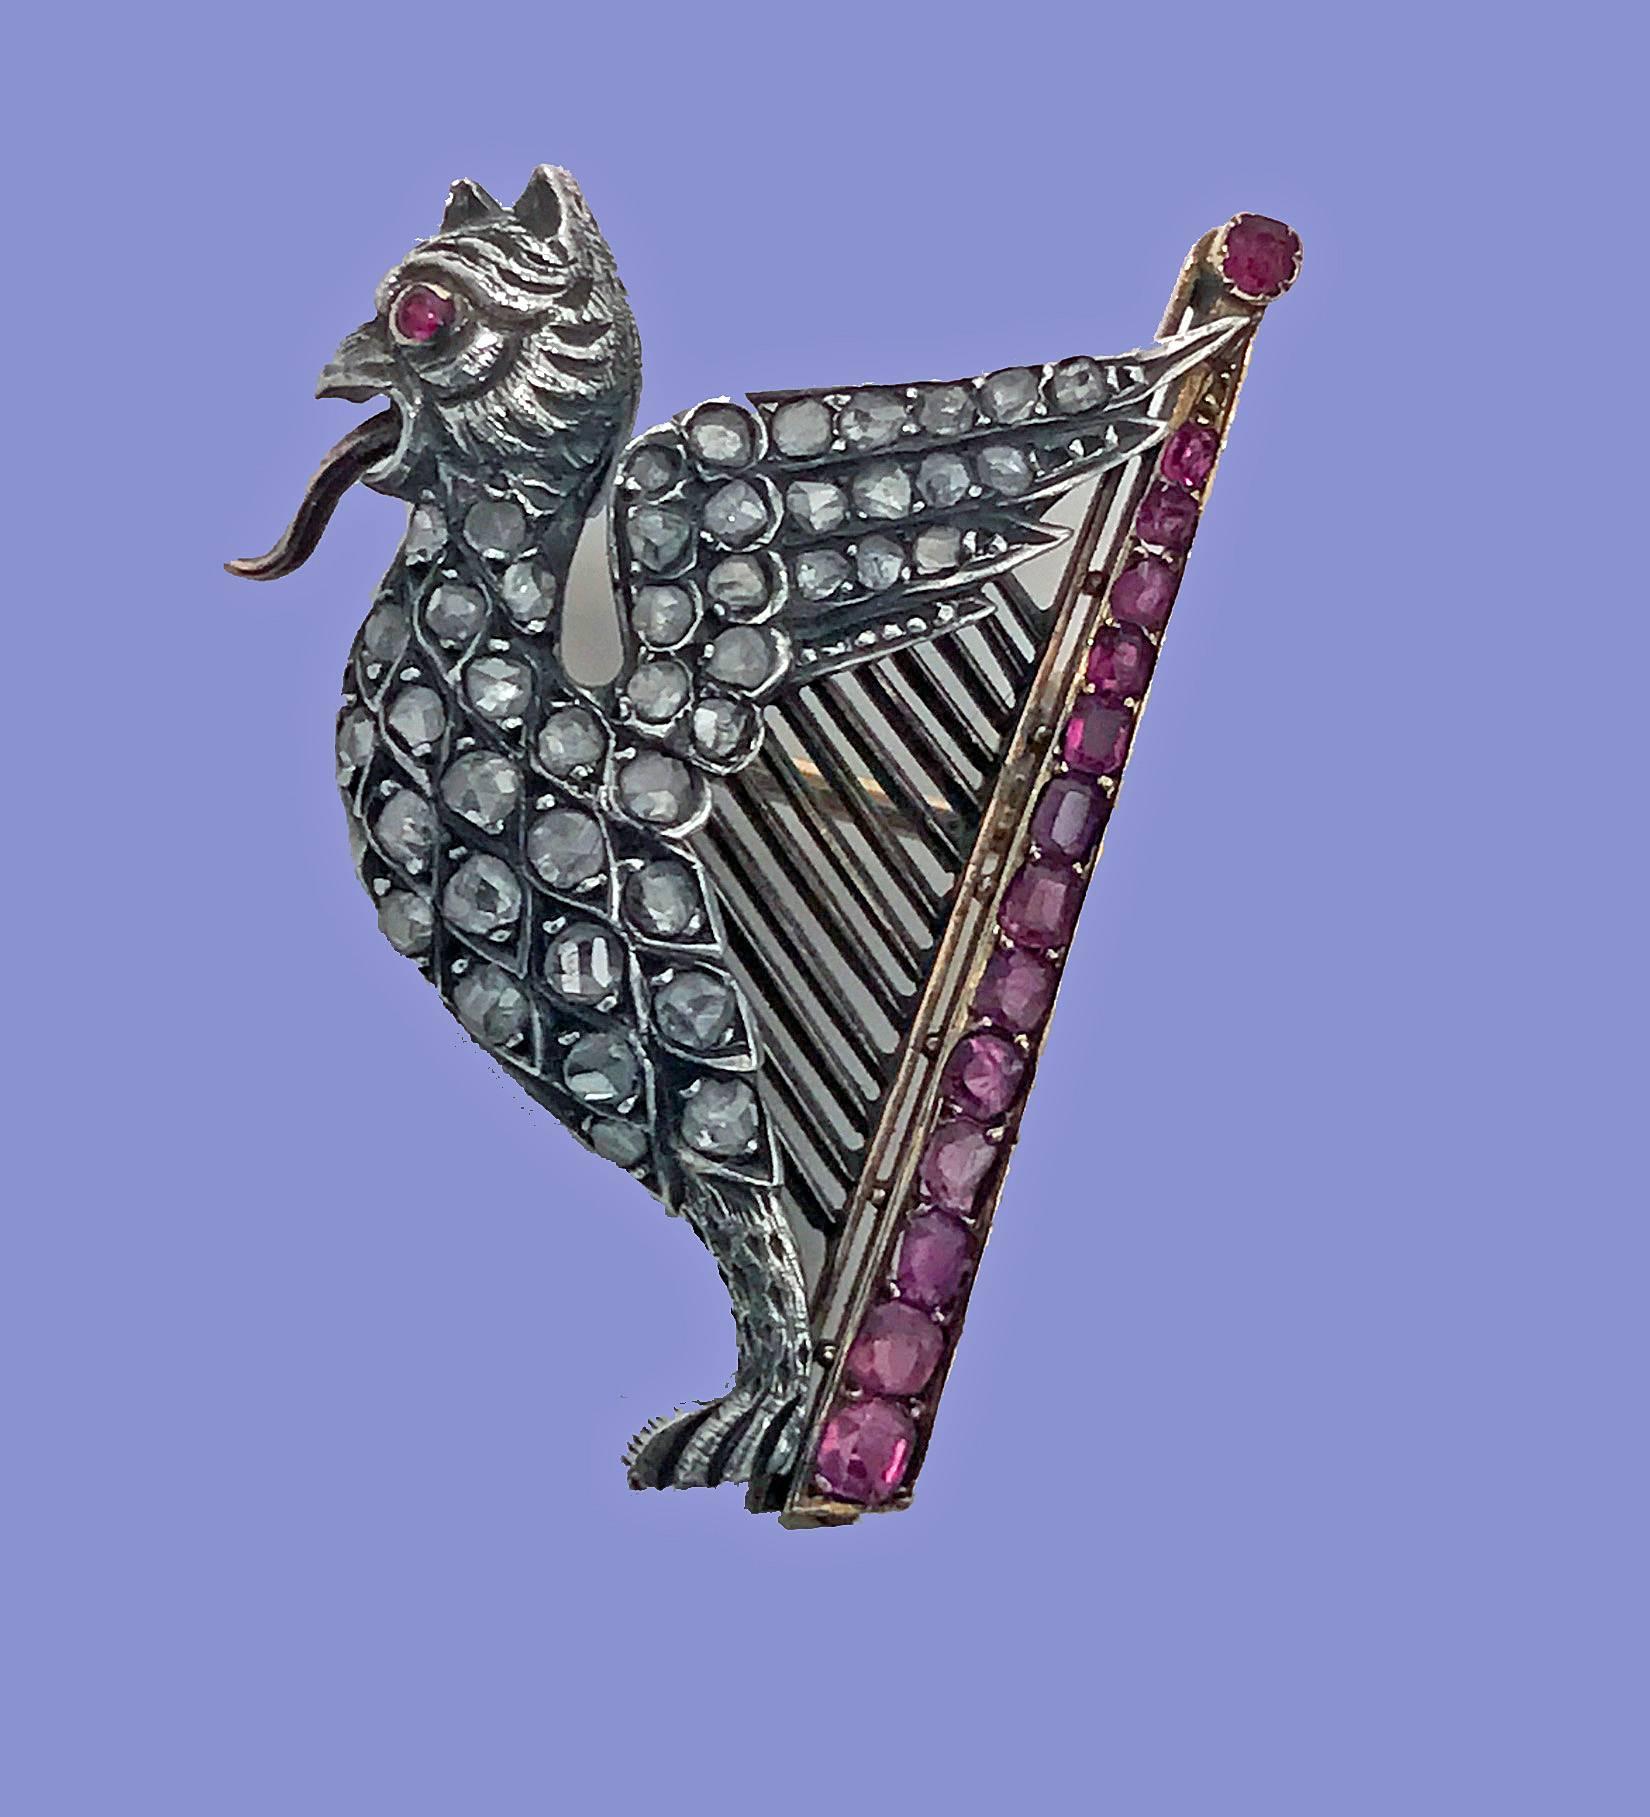 French Griffin and Harp ruby, diamond, pearl and 18-karat (tested) brooch, circa 1890. The winged griffin and harp brooch set in silver and gold. The tongue protruding griffin set with 43 small rose cut diamonds and cabochon ruby eye, realistic